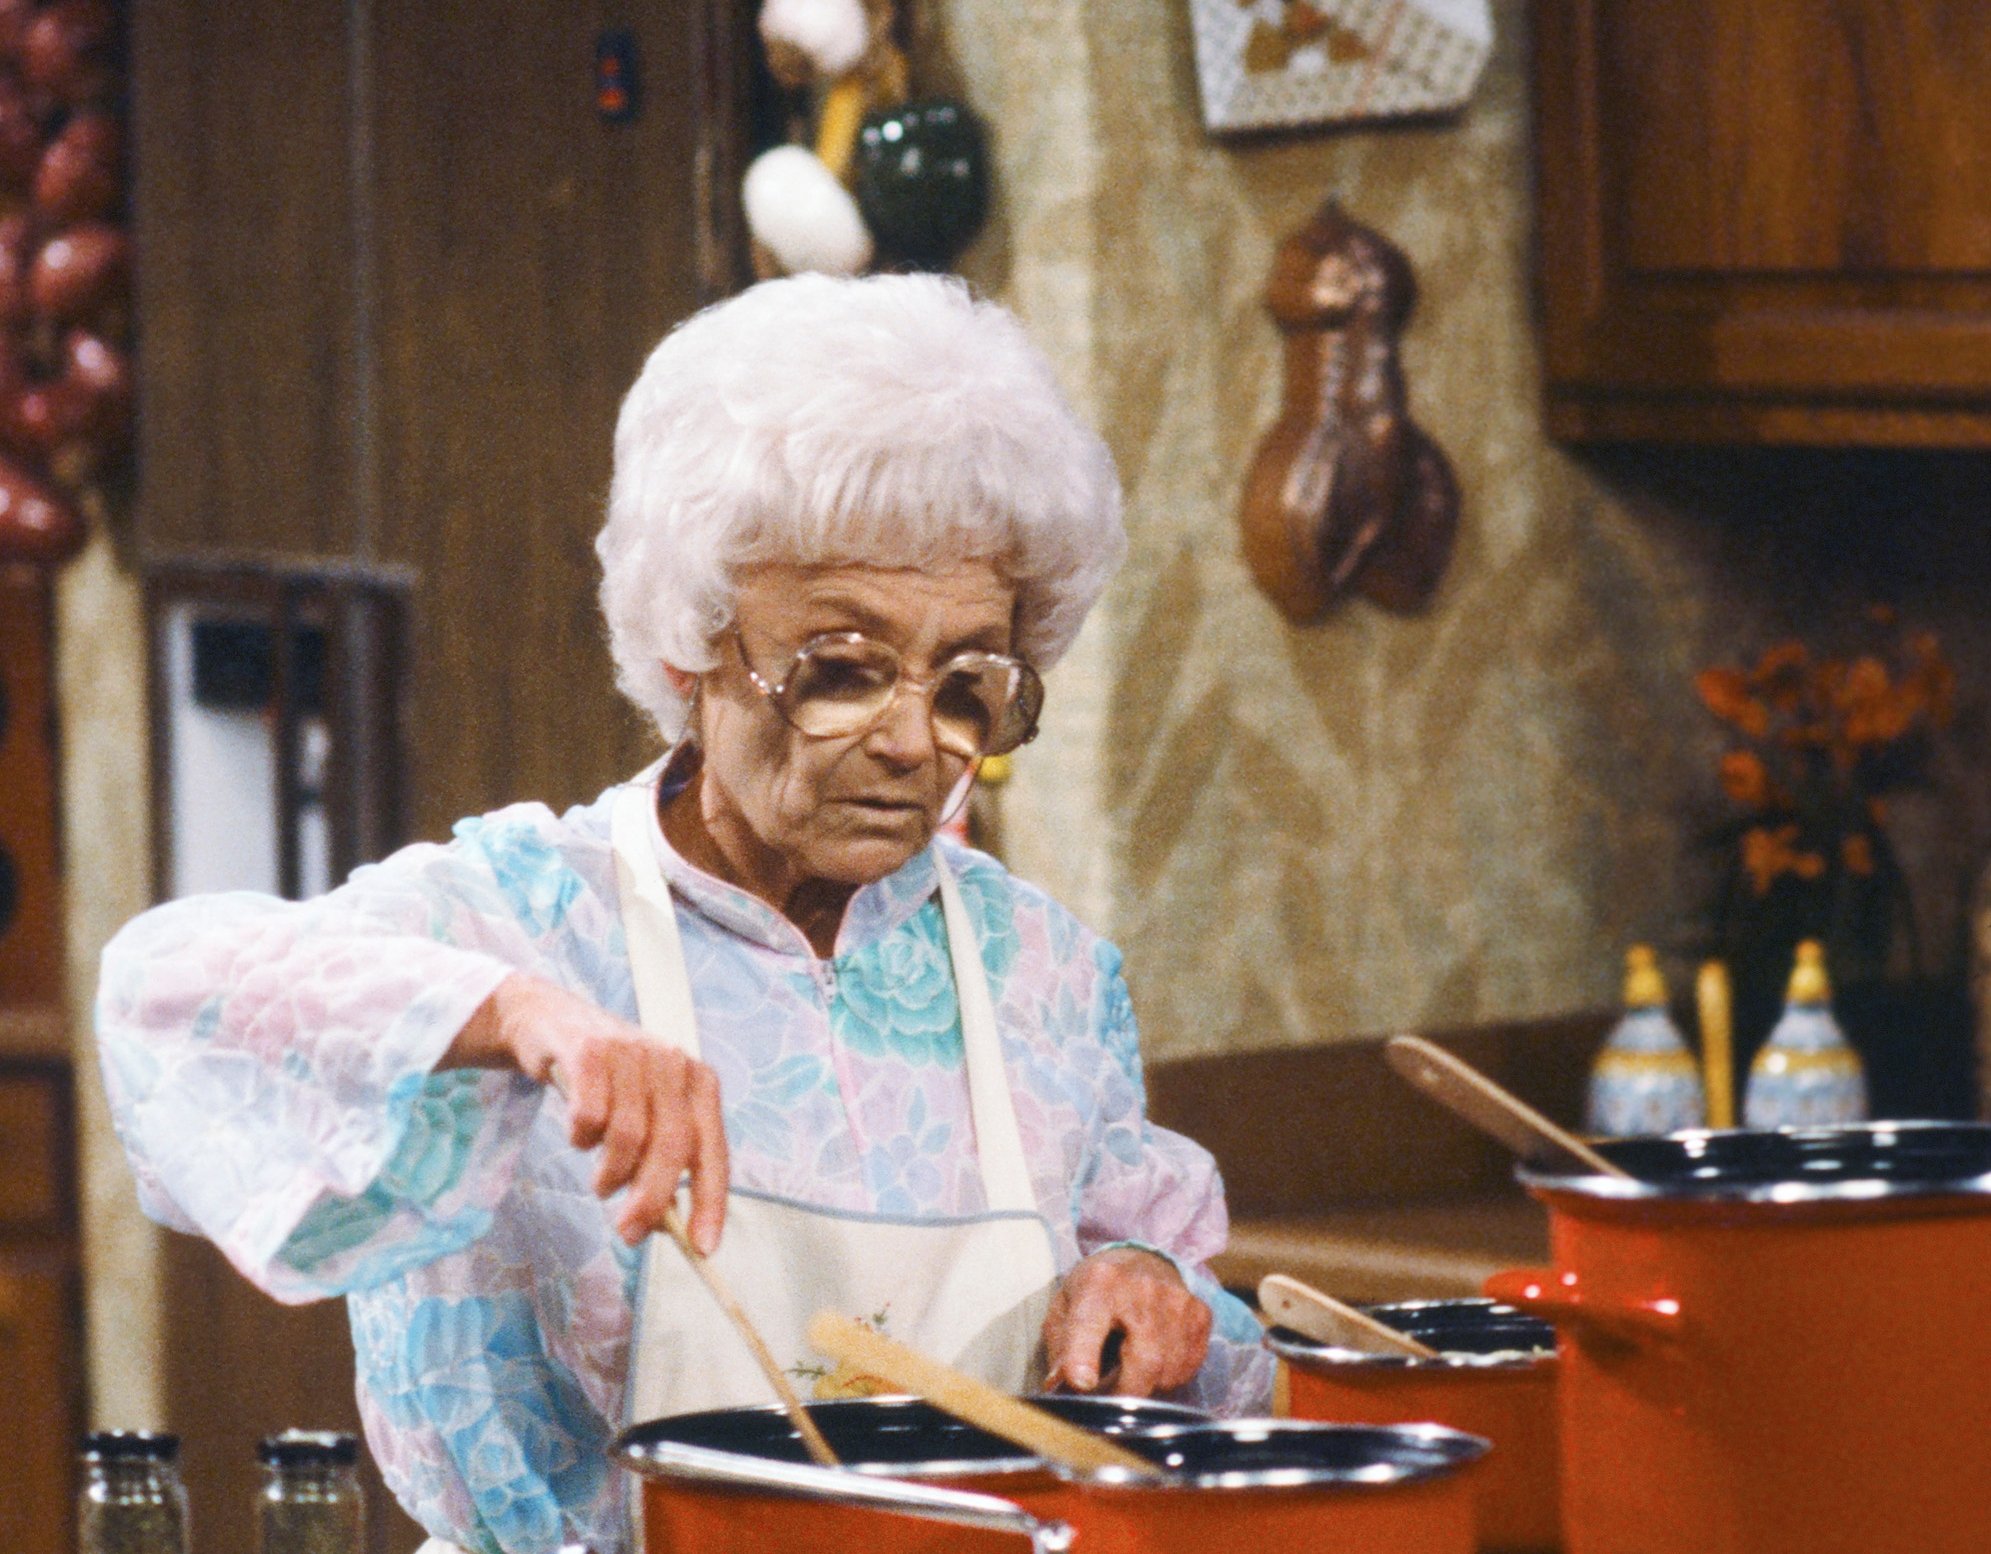 ‘The Golden Girls’ Did Not Have a Penis-Shaped Pan Hidden on the Kitchen Wall